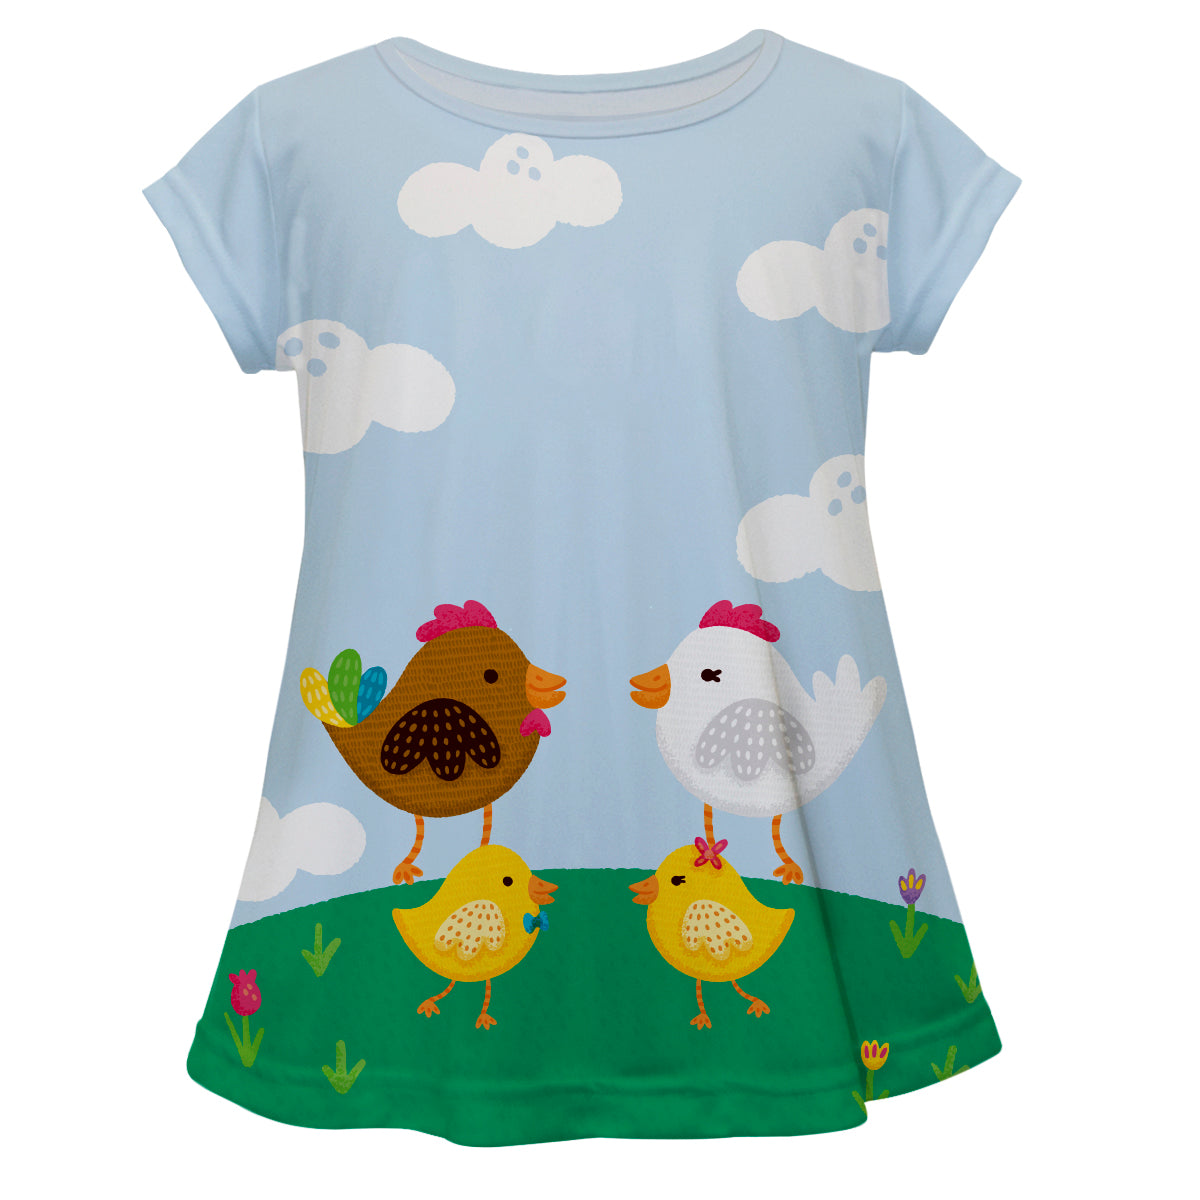 Chickens short sleeve blouse with monogram - Wimziy&Co.